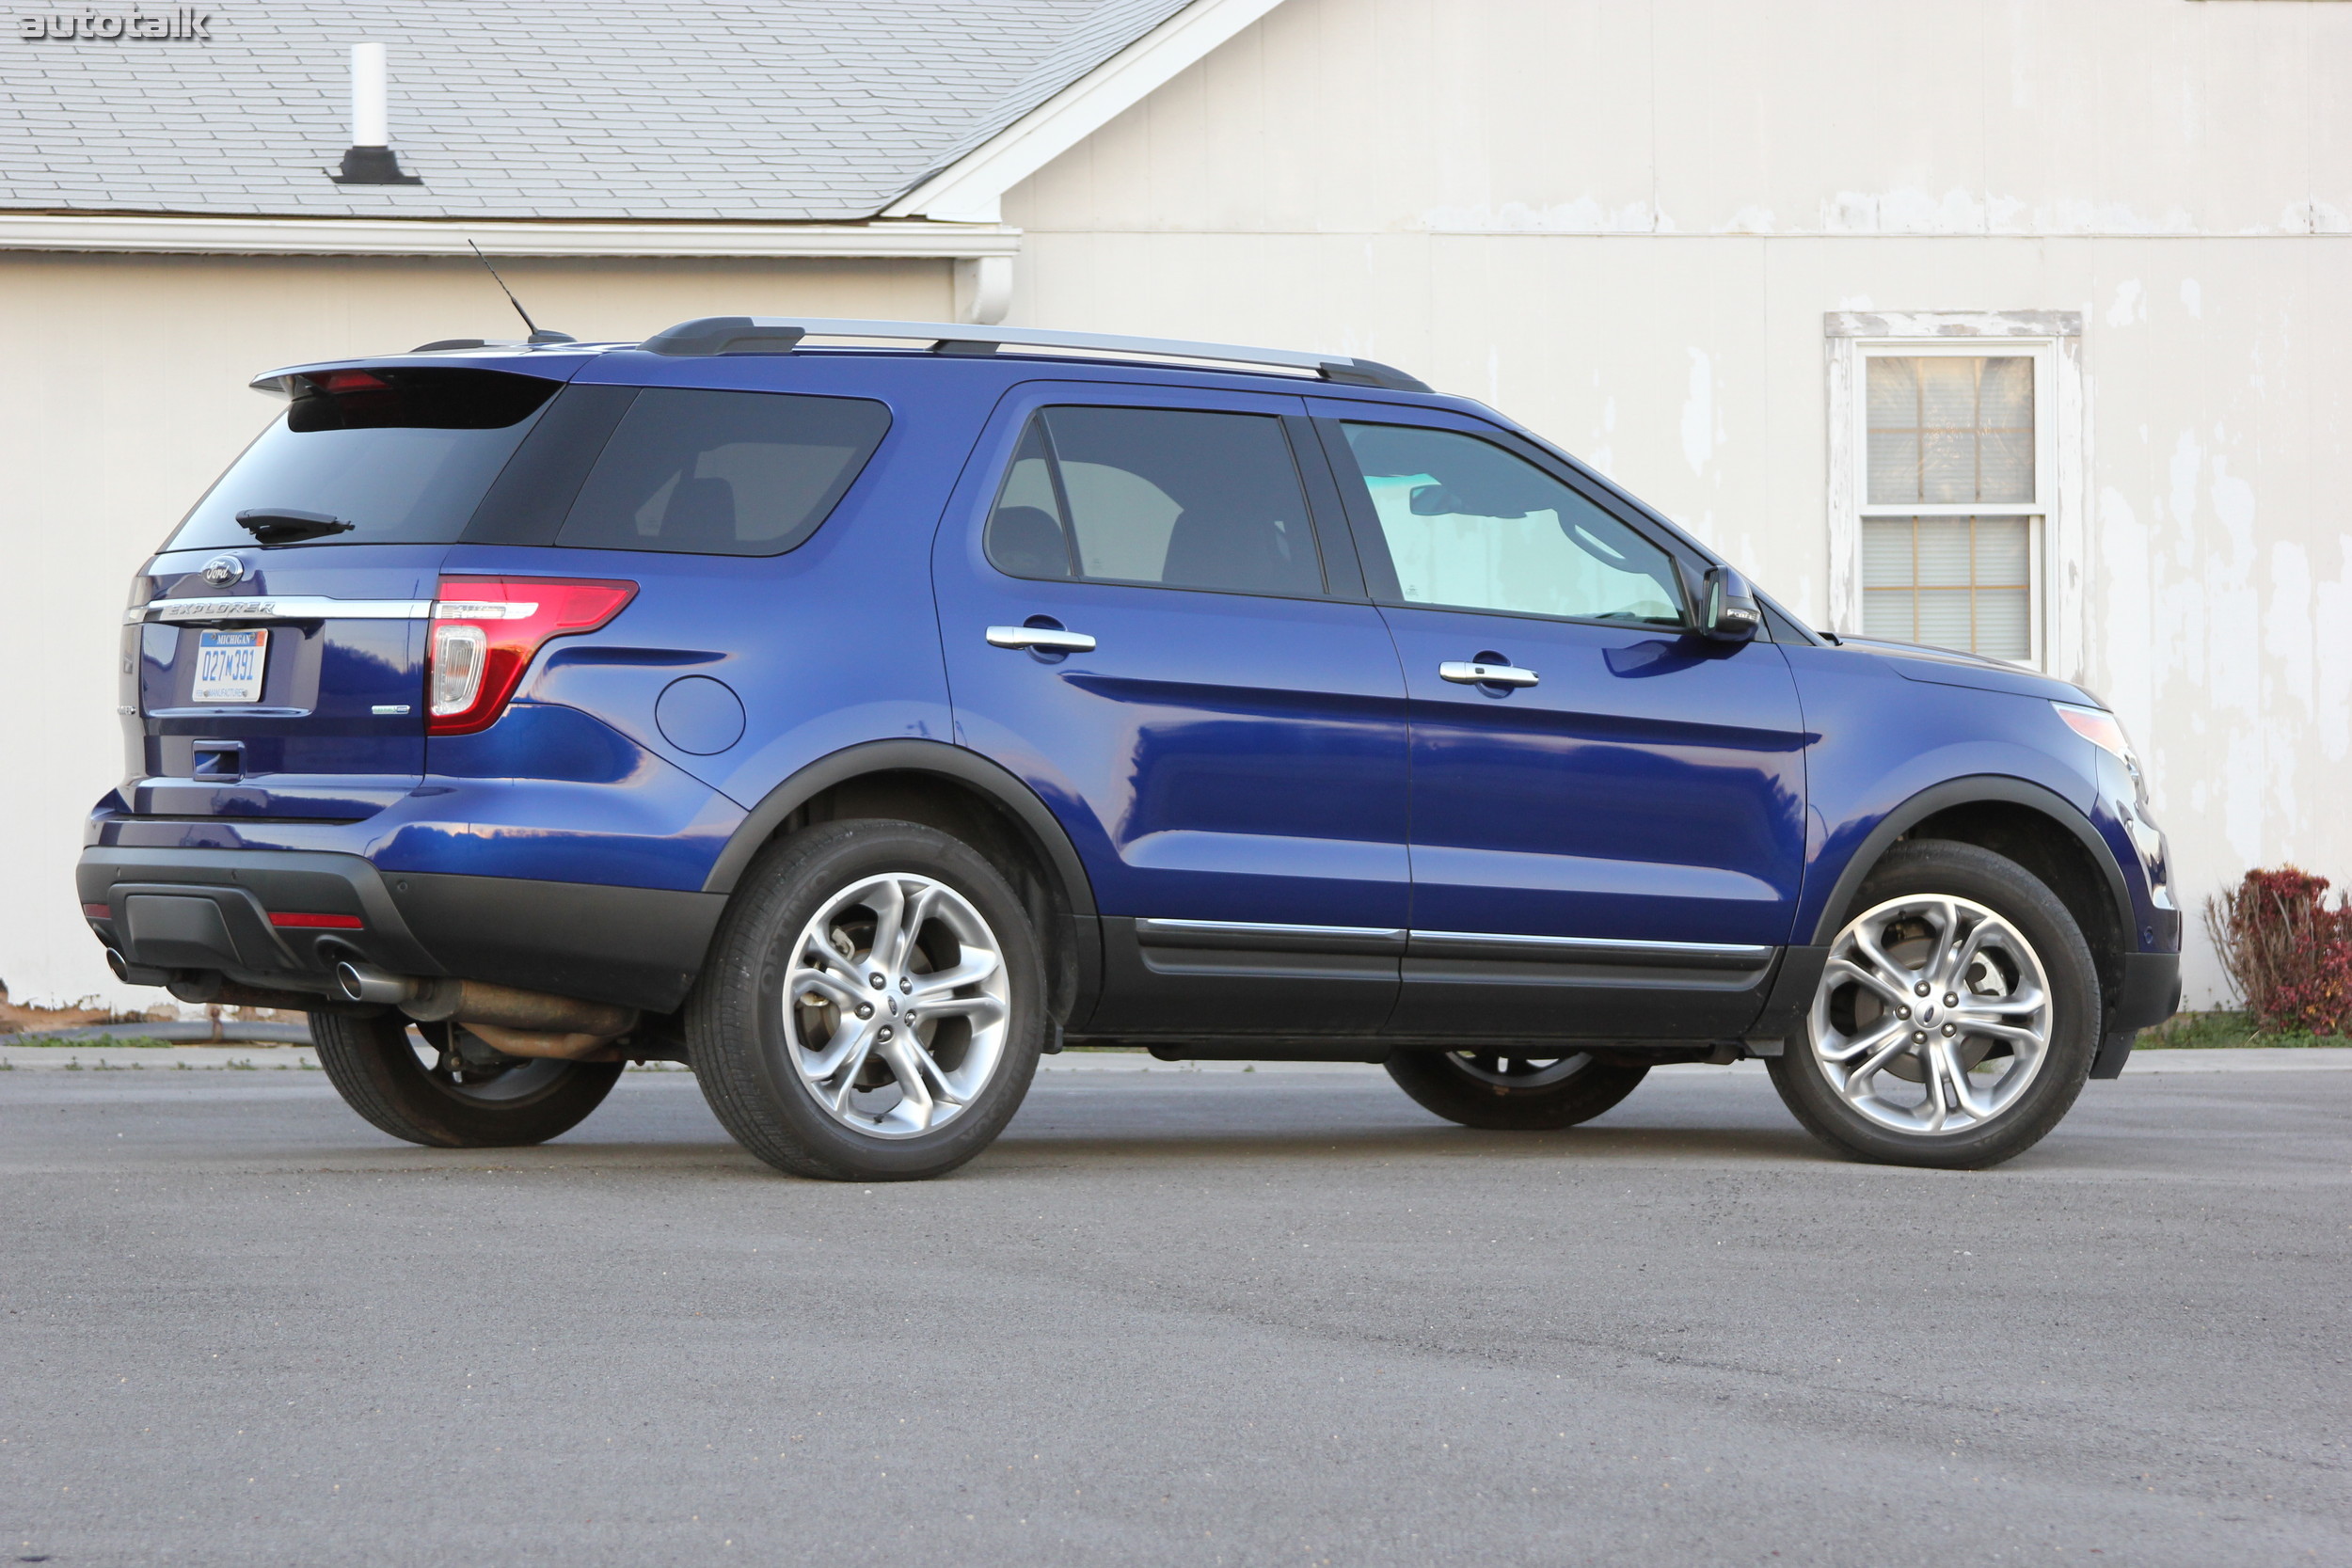 2013 Ford Explorer Limited Review